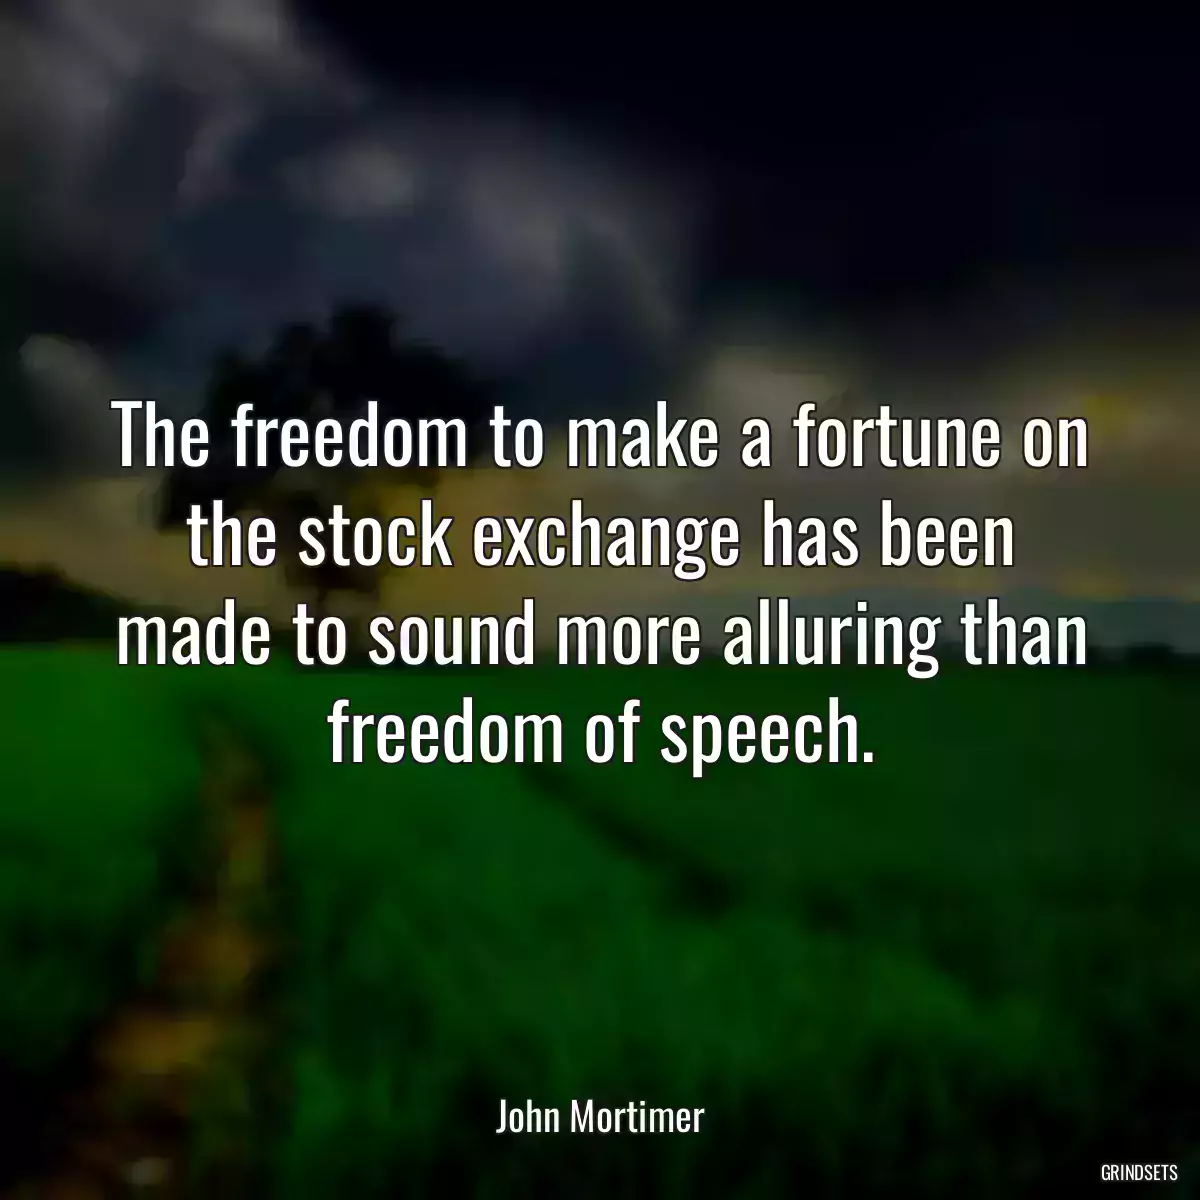 The freedom to make a fortune on the stock exchange has been made to sound more alluring than freedom of speech.